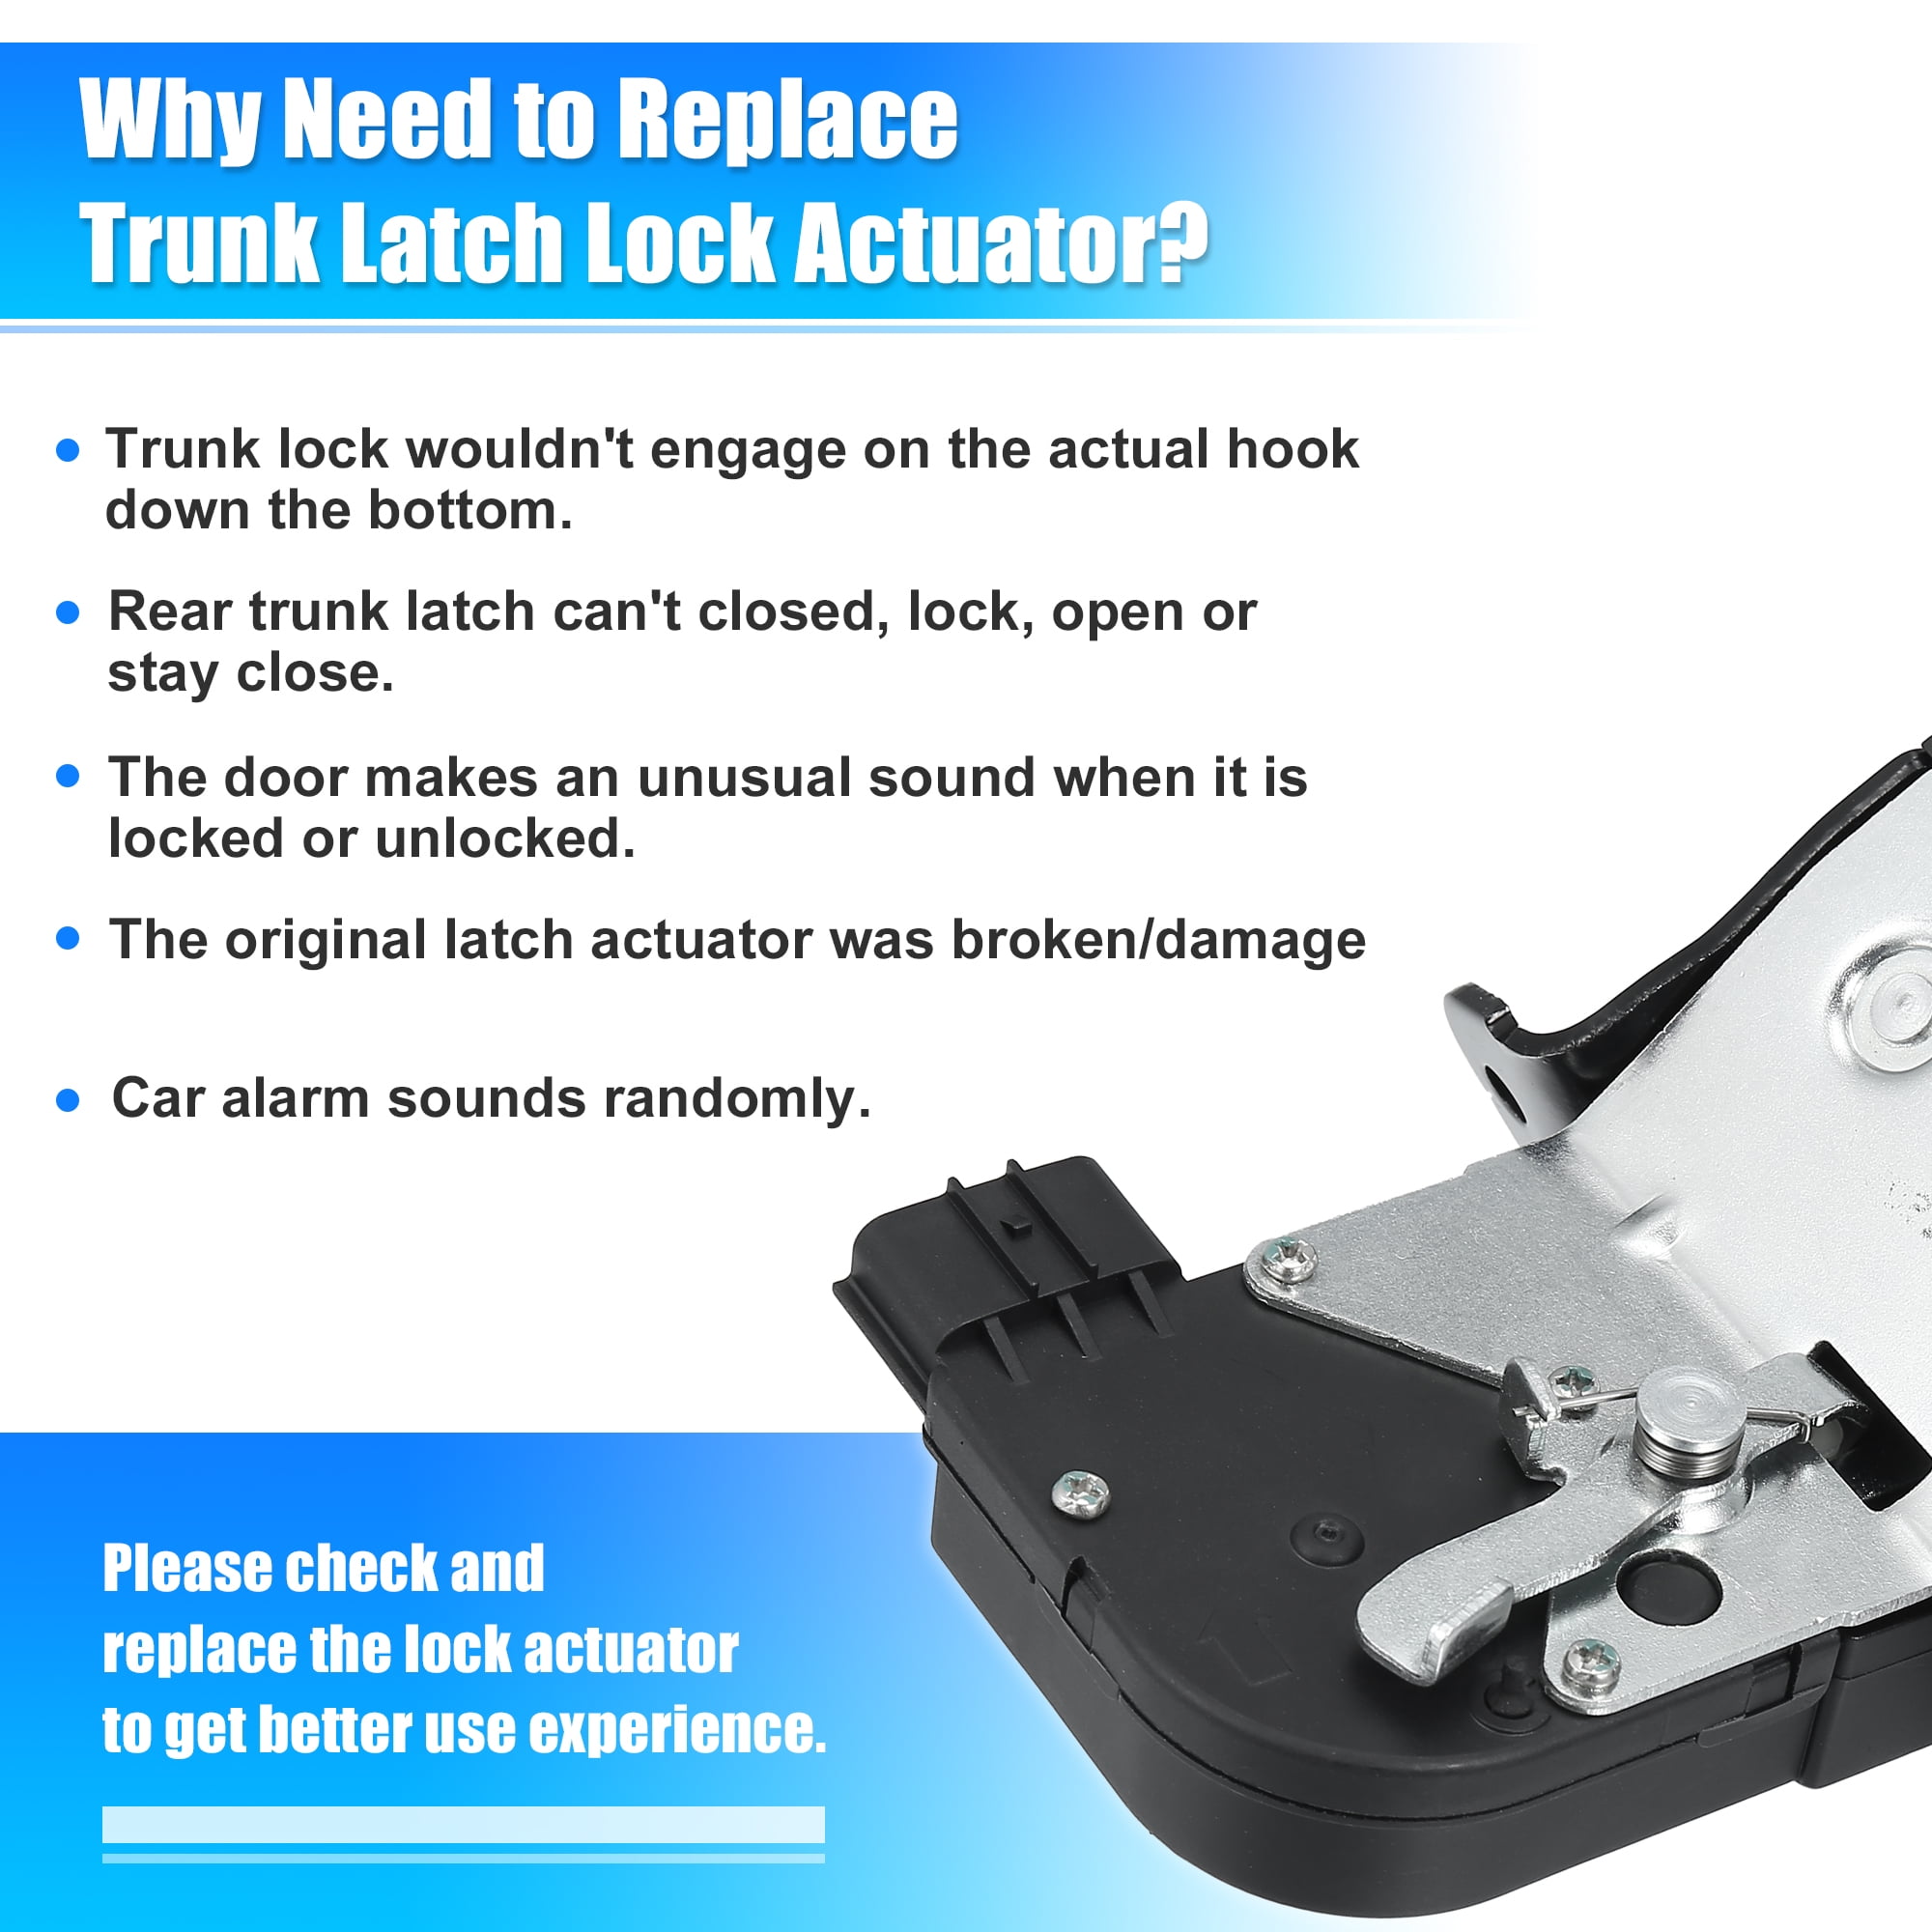 Common Causes and Symptoms of a Faulty Trunk Lock Actuator - In